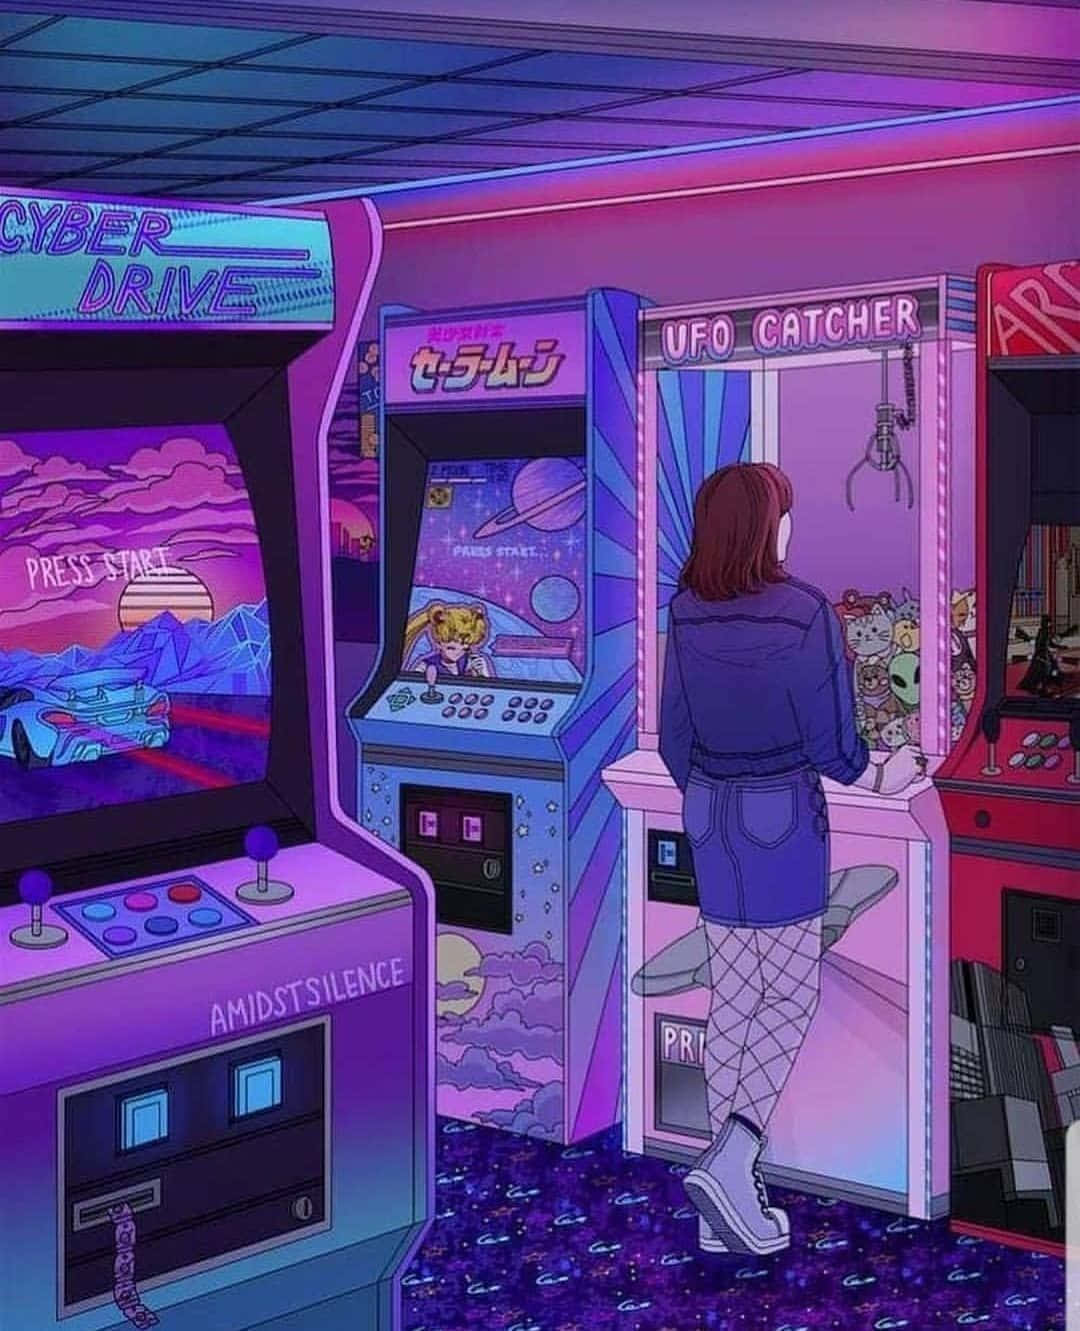 Step into a world of nostalgia with Arcade Aesthetic. Wallpaper